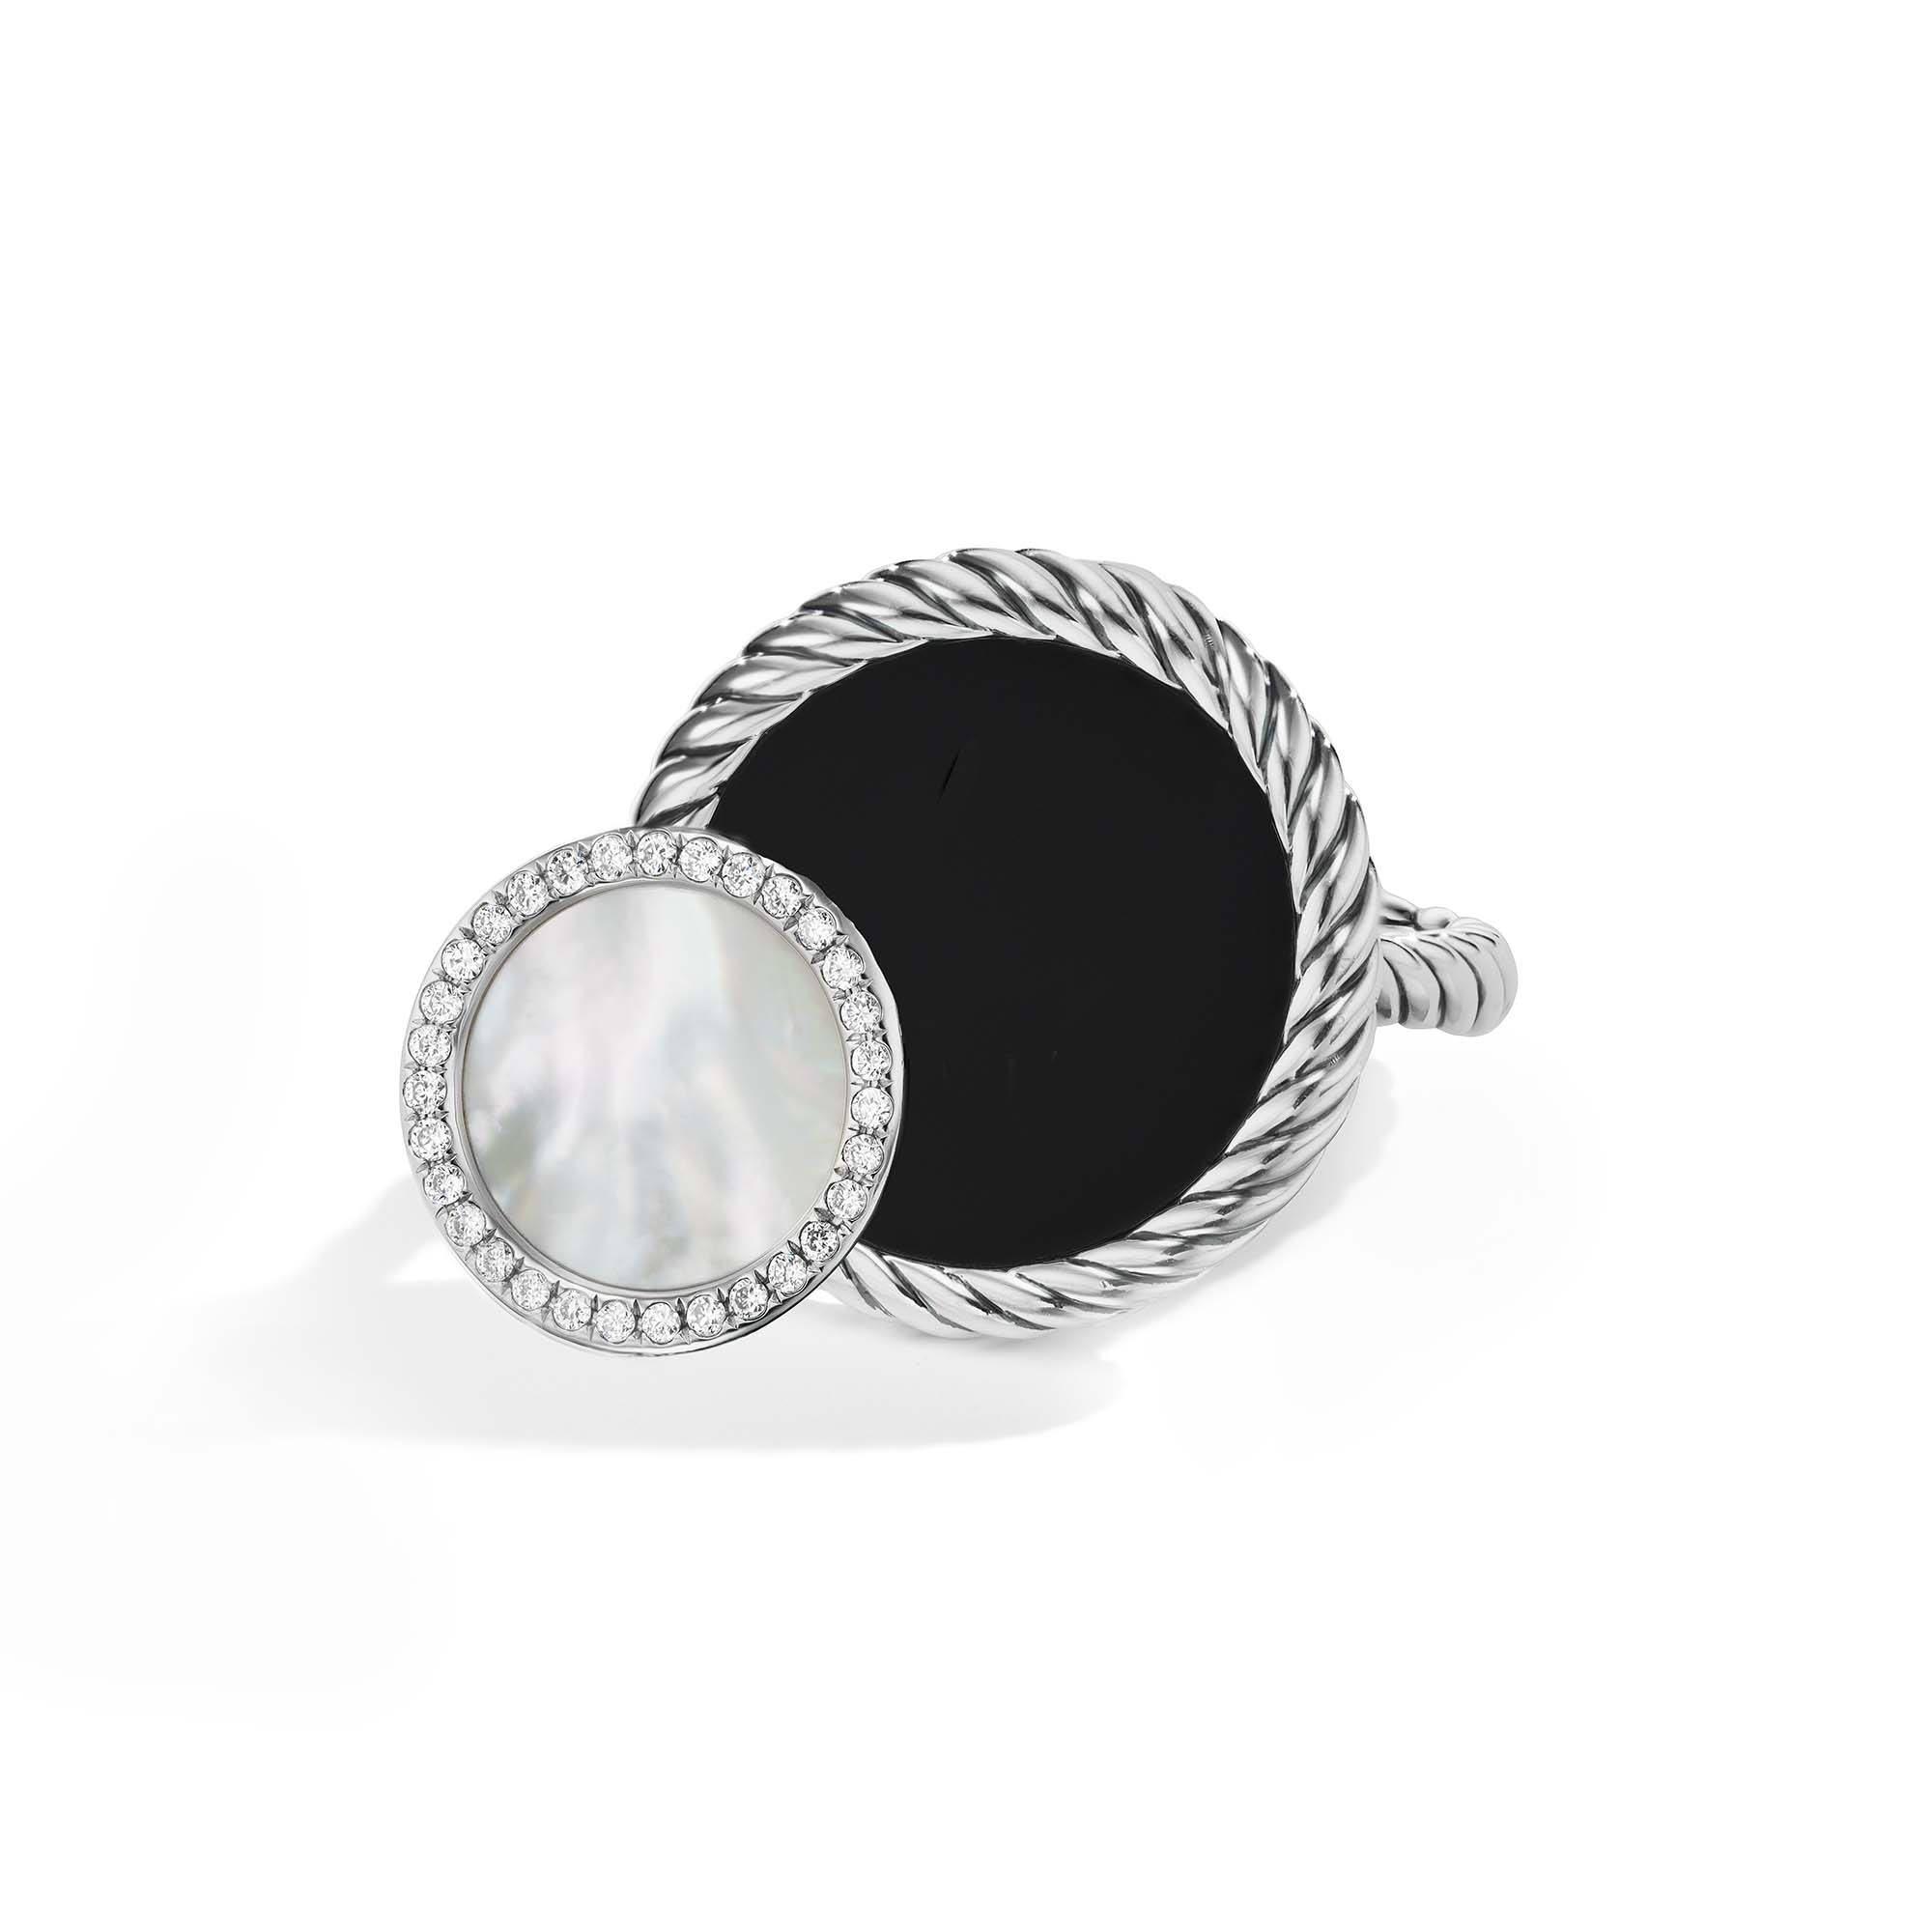 DY Elements® Eclipse Ring with Black Onyx, Mother of Pearl and Pavé Diamonds, Long's Jewelers